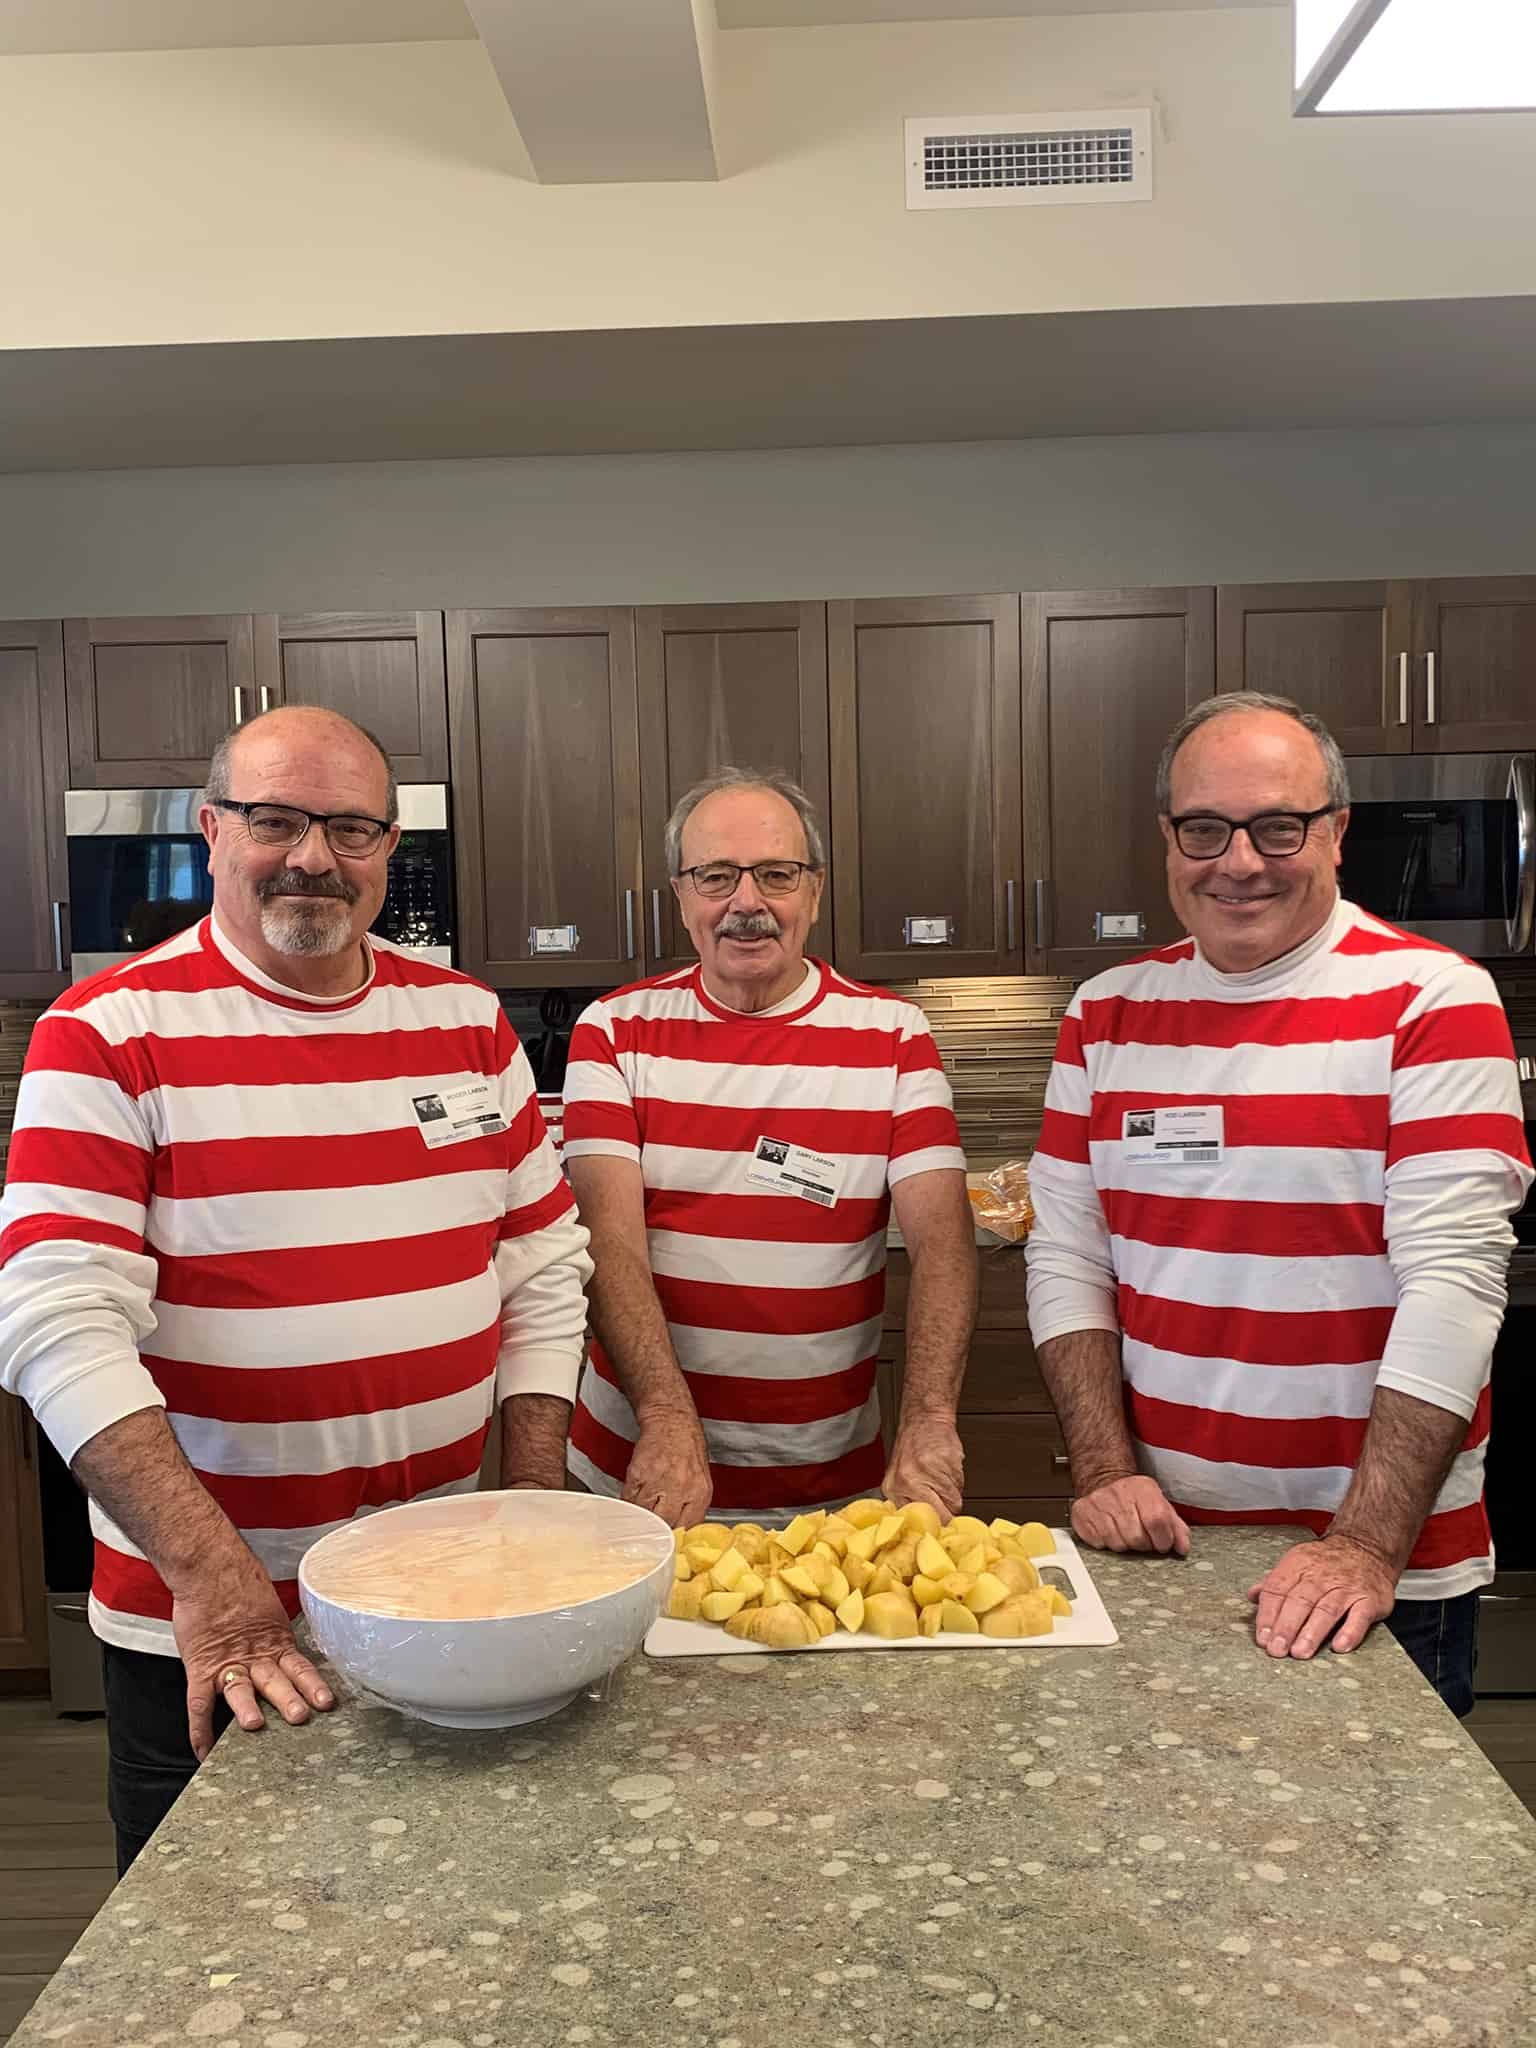 Larson brothers wearing striped shirts in House kitchen